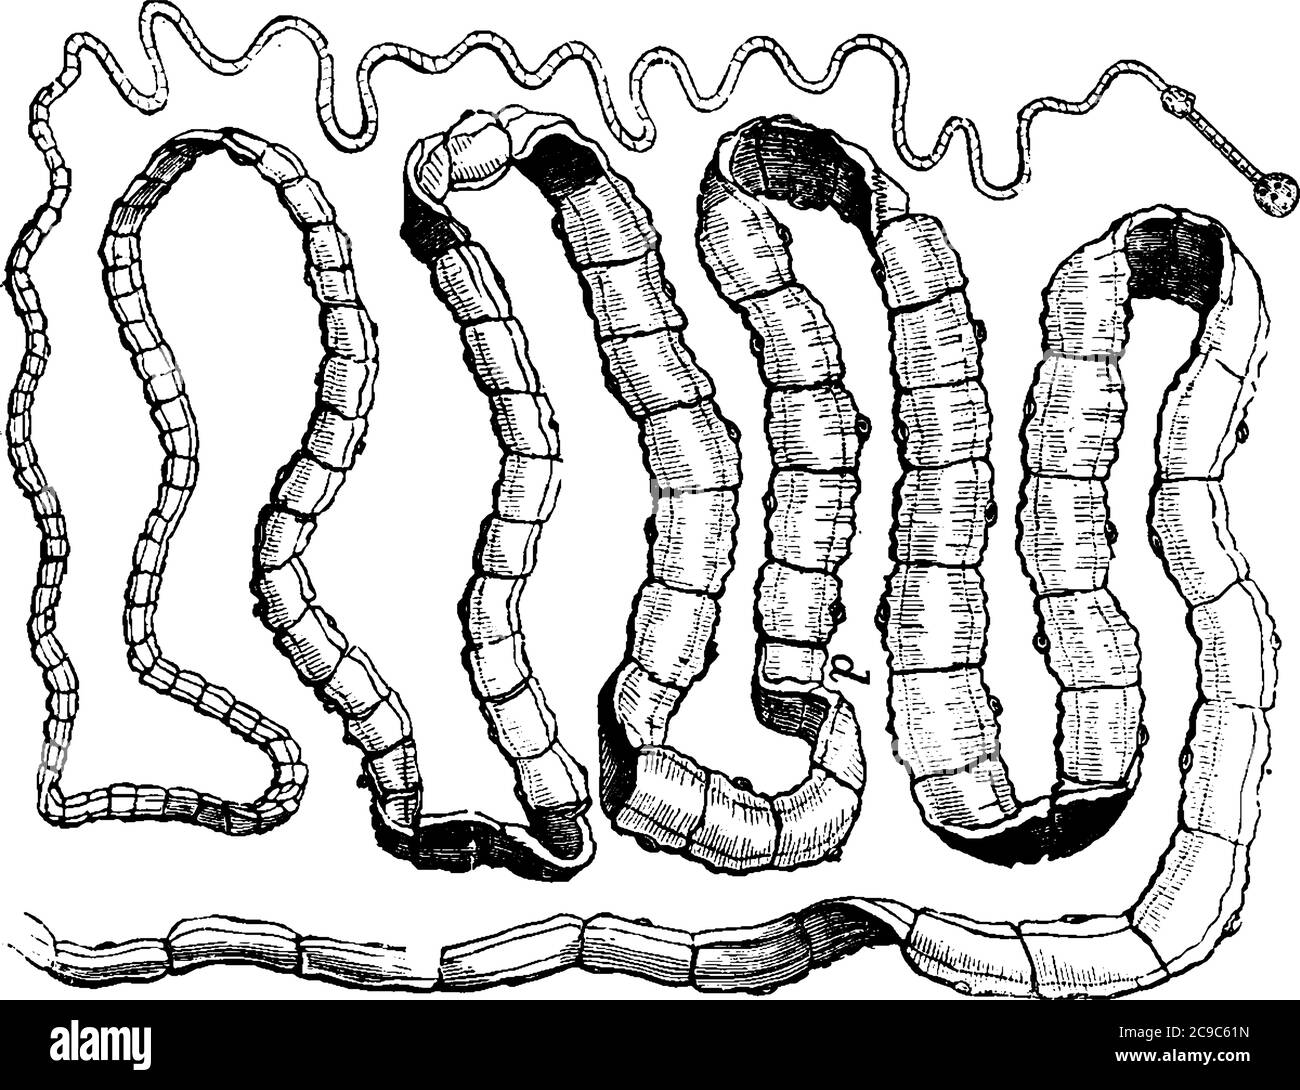 Tapeworm, anchors itself to the intestines of its victims, by means of hooks and suckers at the head, its body is composed of numerous segments, and t Stock Vector